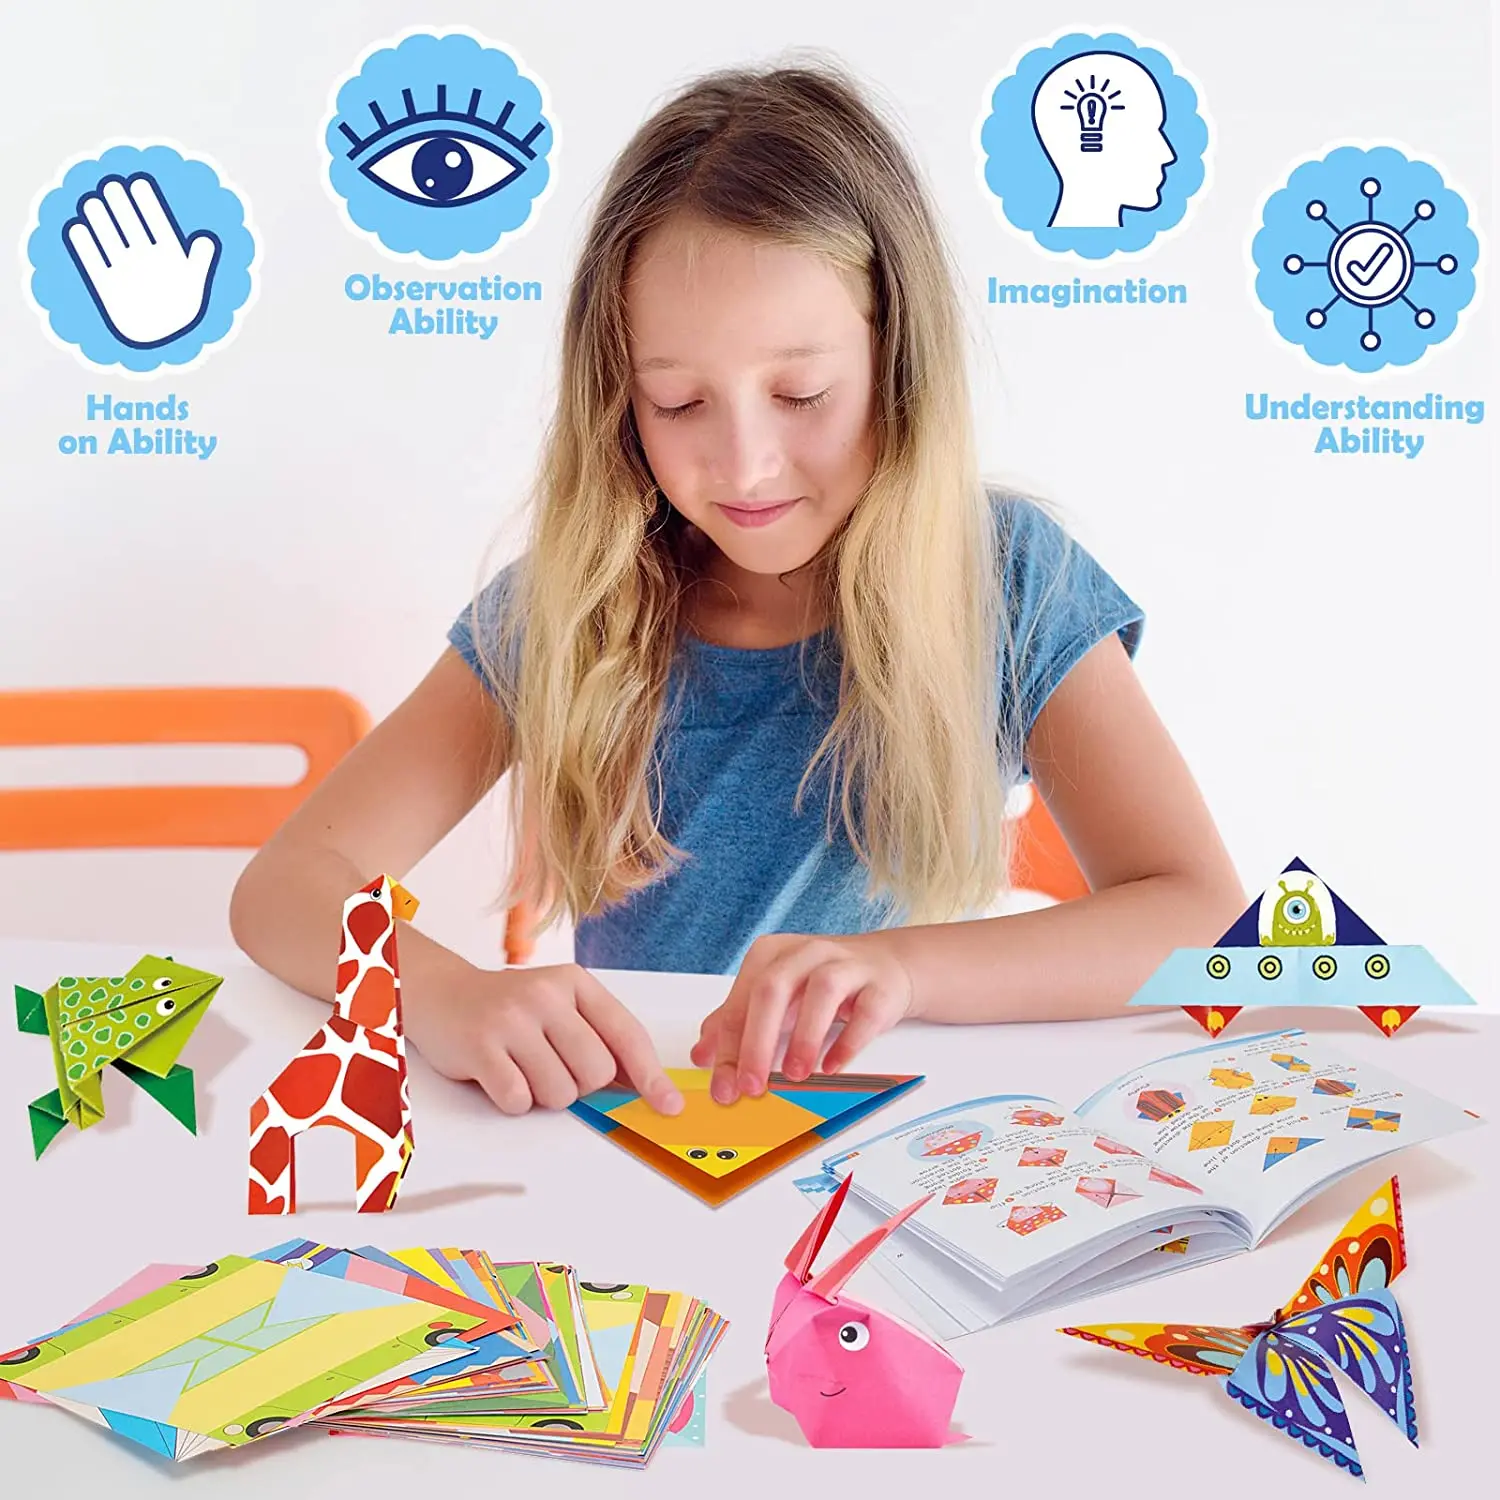 https://ae01.alicdn.com/kf/Se9b5eca4e0304097adc19f7f8aedf23eA/Craft-Origami-Paper-for-Kids-54Sheets-Vivid-Colorful-Folding-Papers-27Patterns-Art-Projects-Kit-Teen-Birthday.jpg